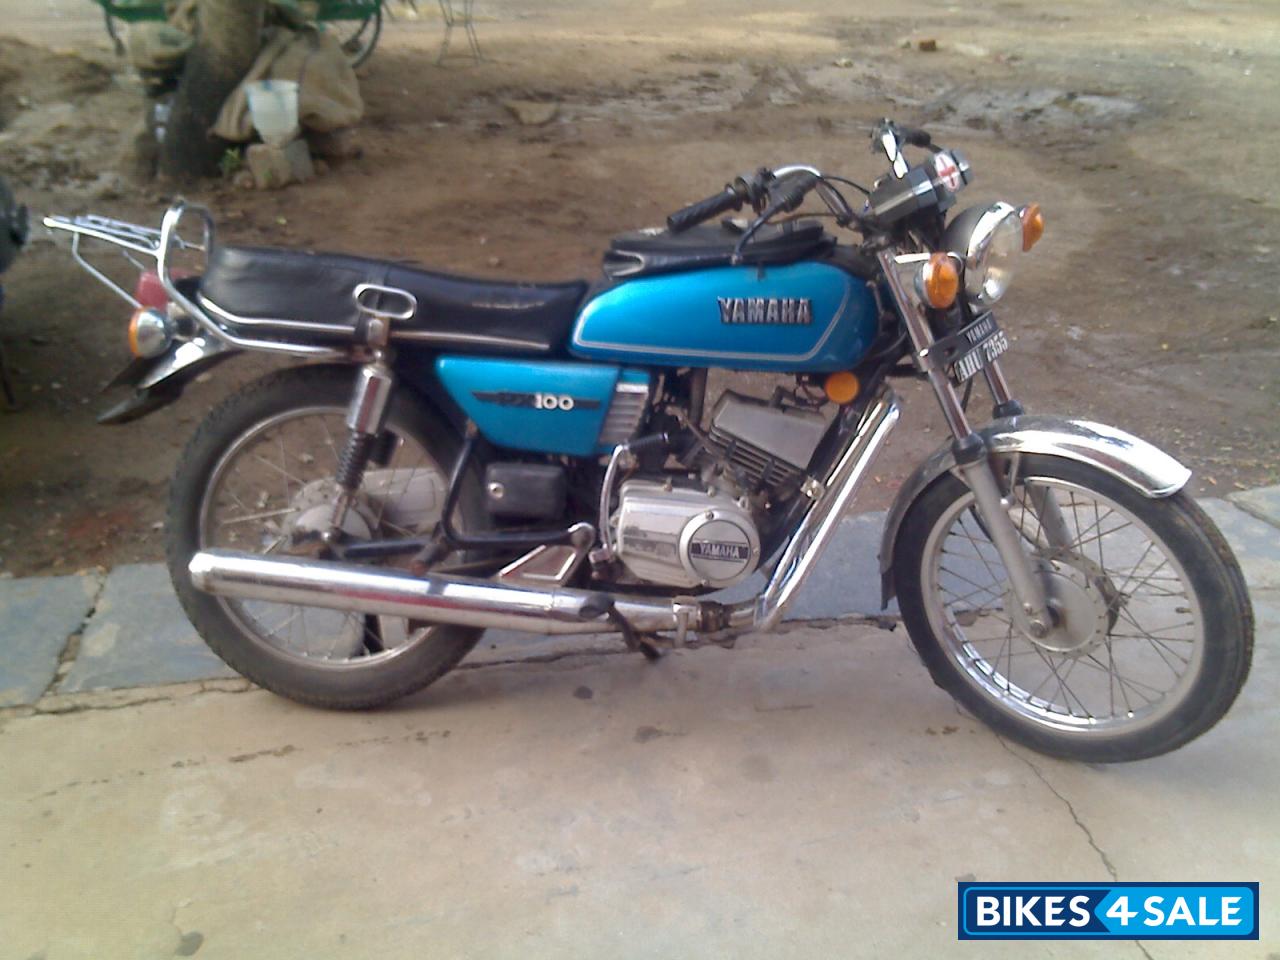 Used 1987 Model Yamaha Rx 100 For Sale In Hyderabad Id Org Blue Colour Bikes4sale